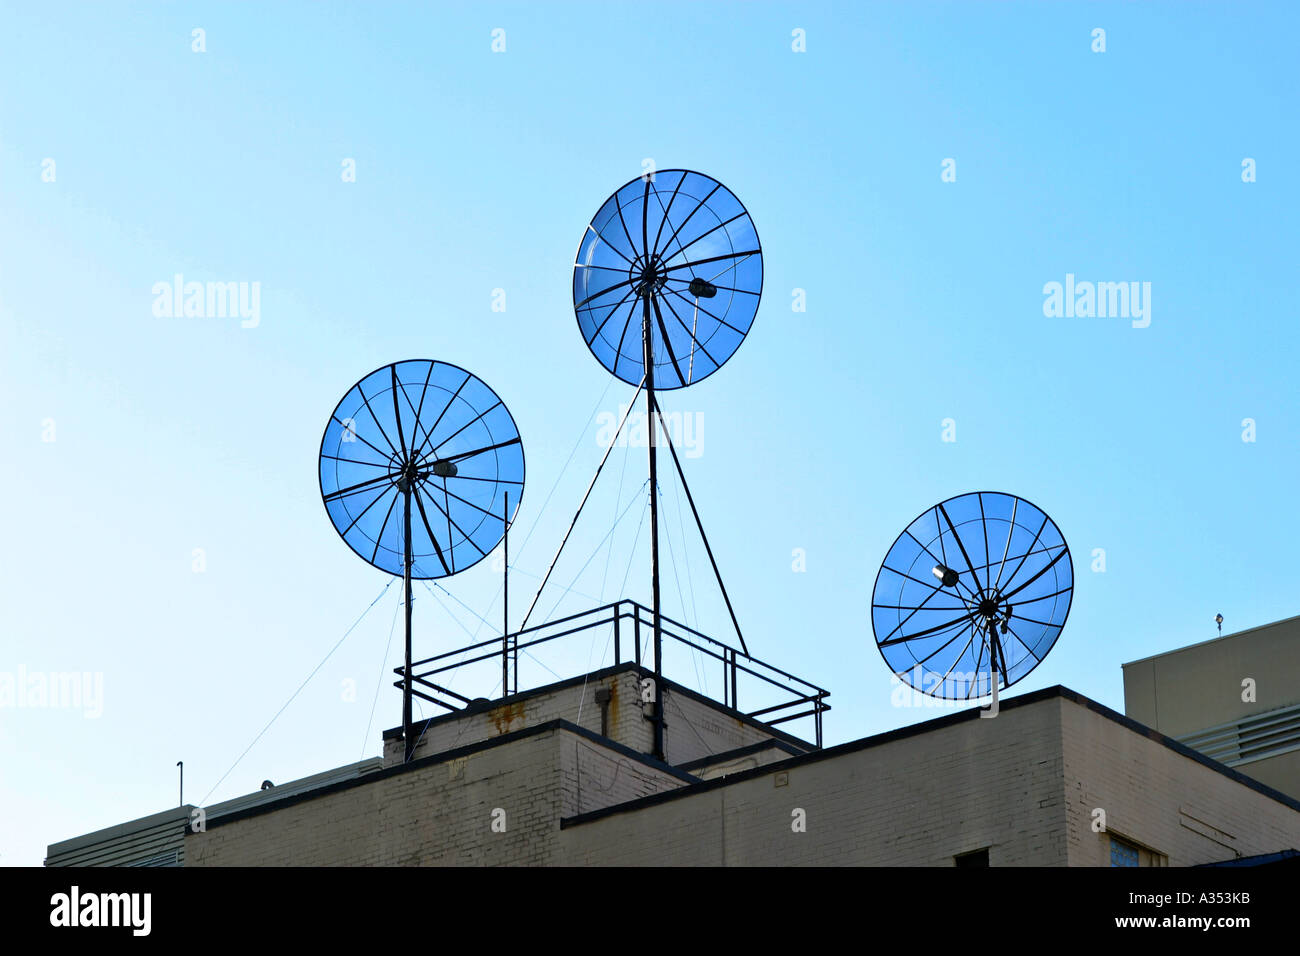 Satellites on a rooftop, against perfectly blue sky. Stock Photo